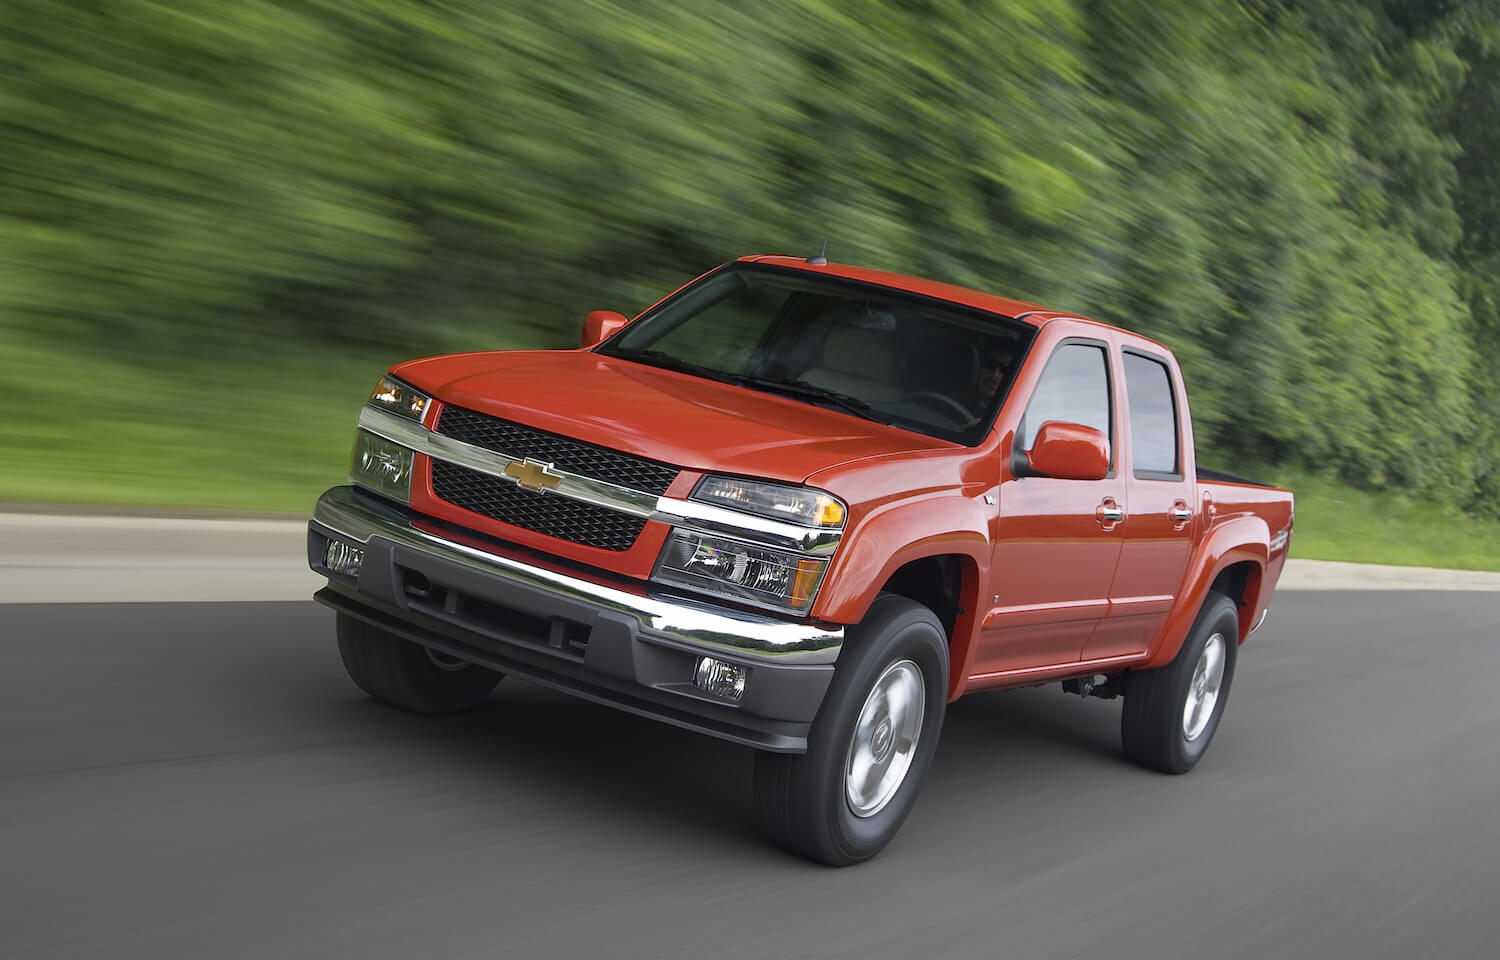 An orange 2009 Chevrolet Colorado (first-generation) driving towards the camera fro a promo photo, trees visible in the background.